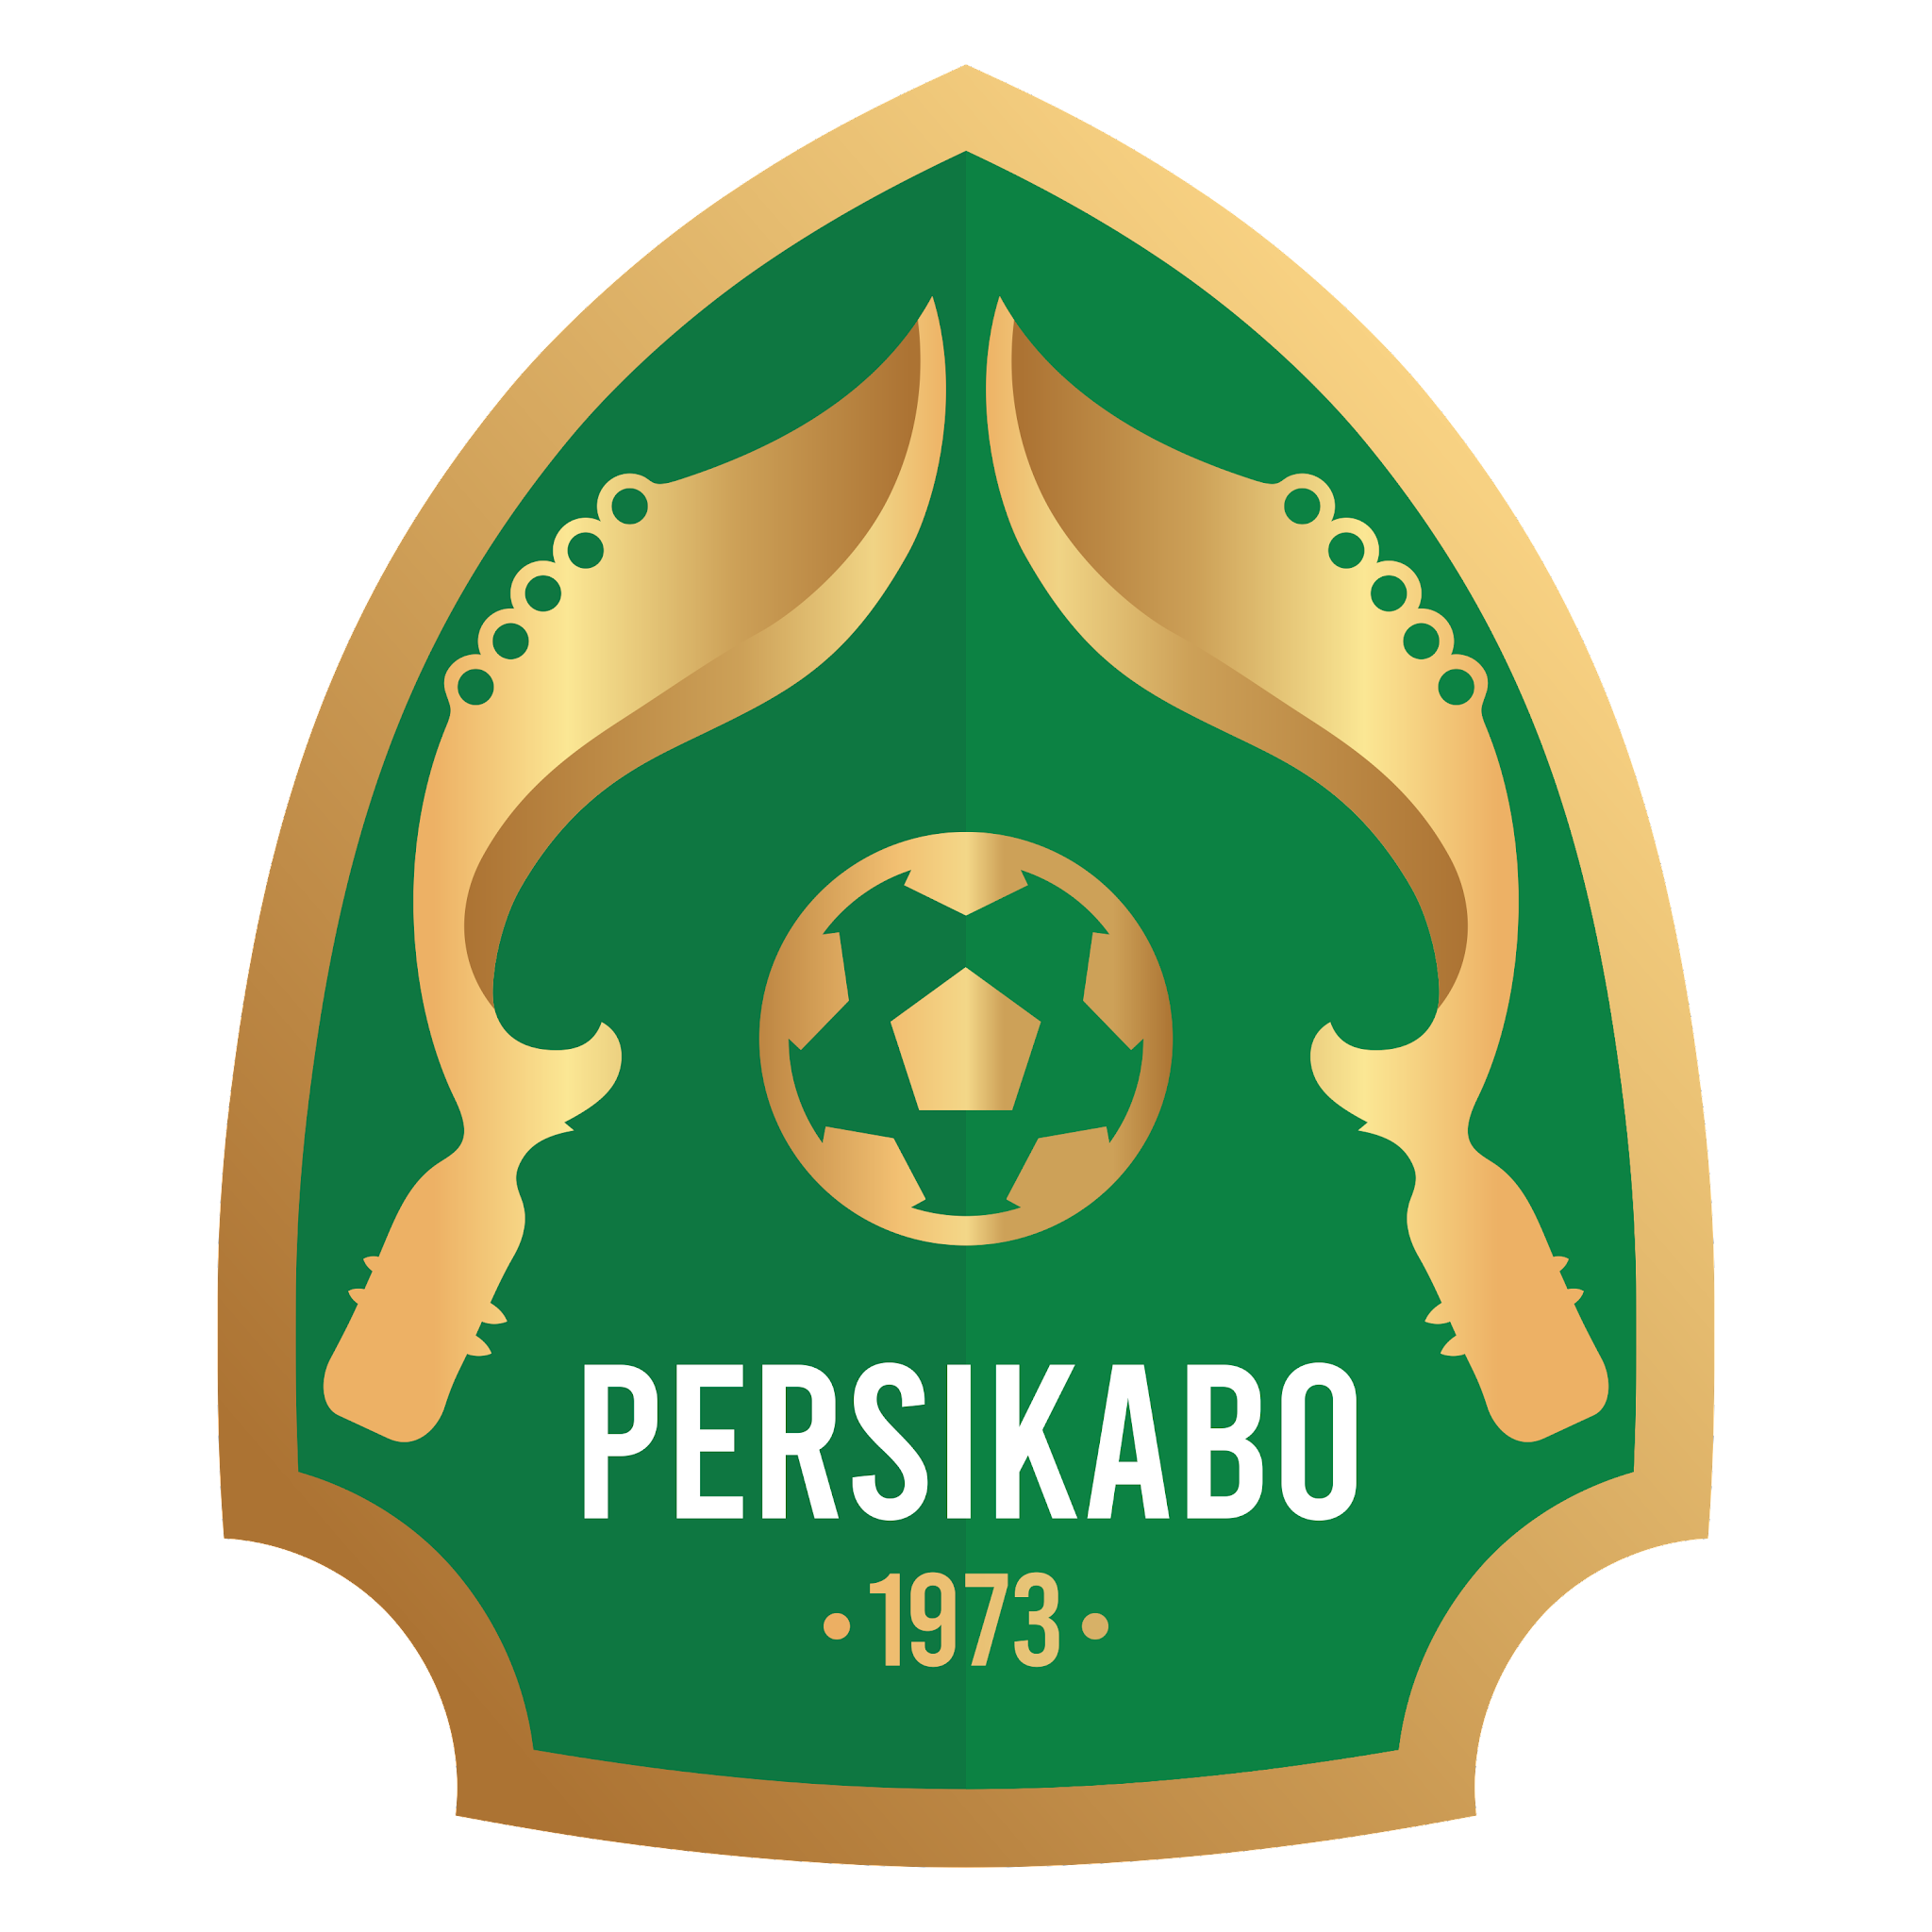 Persikabo 1973 Logo Vector Format (CDR, EPS, AI, SVG, PNG)